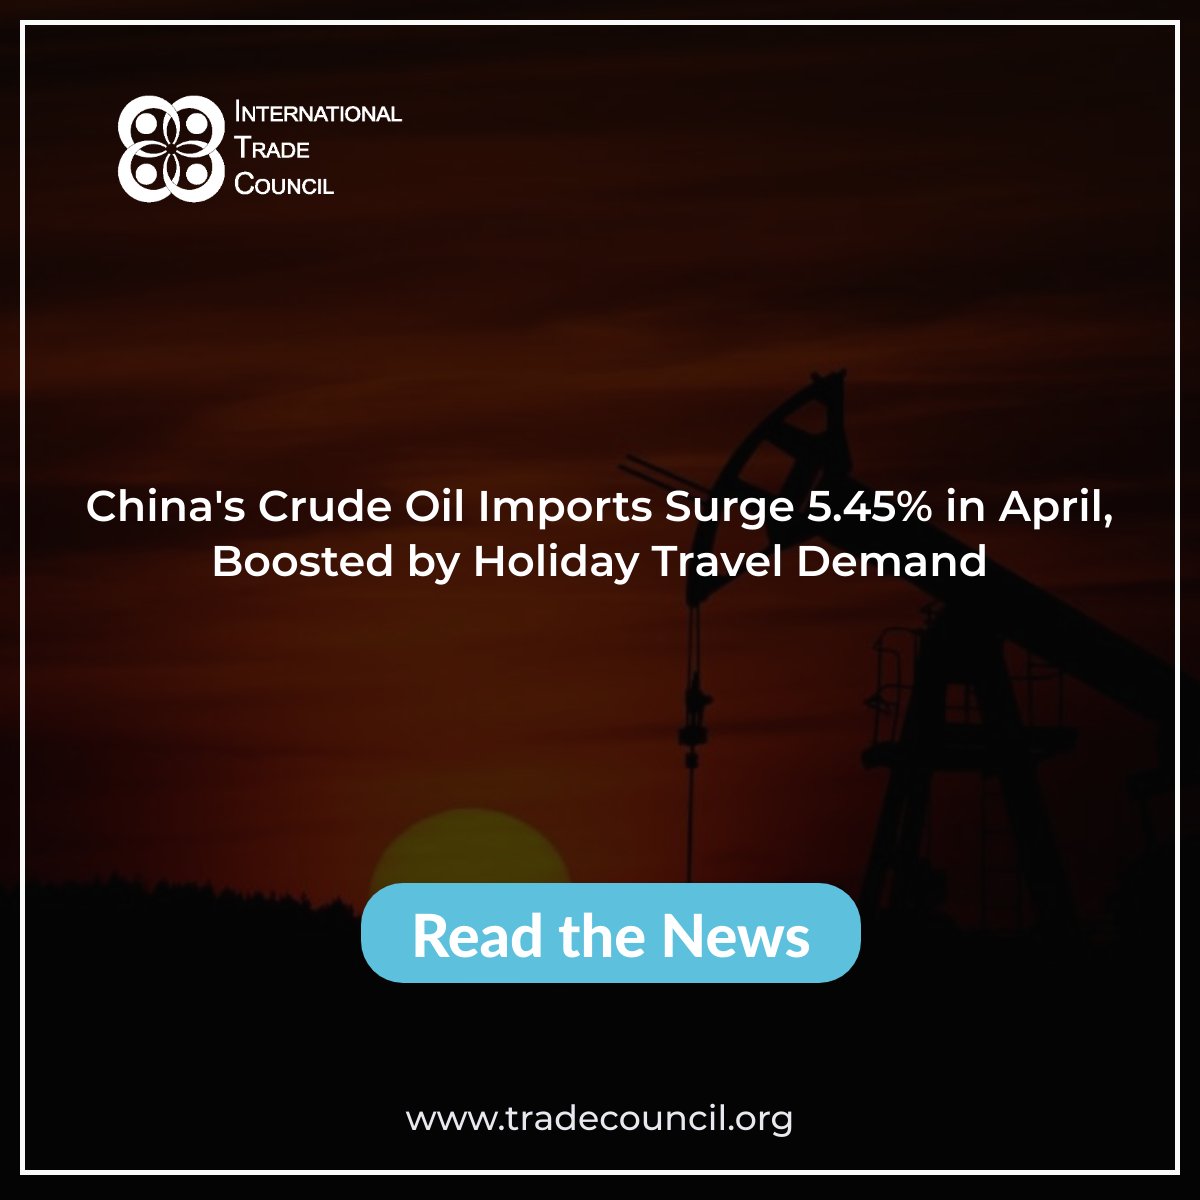 China's Crude Oil Imports Surge 5.45% in April, Boosted by Holiday Travel Demand
Read The News: tradecouncil.org/chinas-crude-o…
#ITCNewsUpdates #CrudeOilImports #EnergyDemand #TradeData #EconomicRecovery #InternationalTradeCouncil